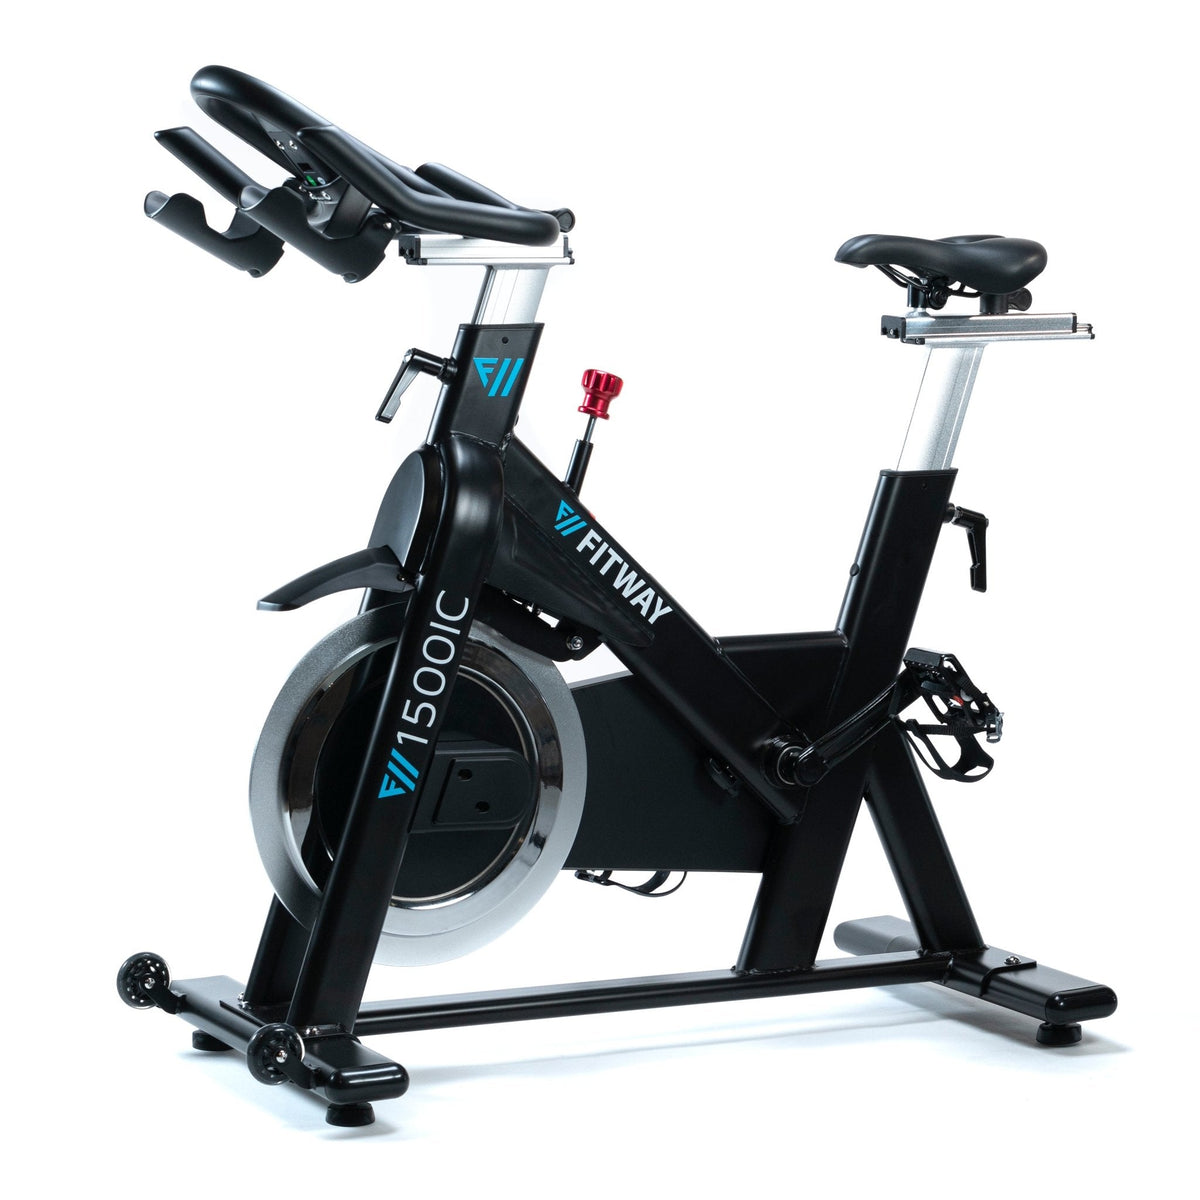 FitWay Equip. 1500IC Indoor Cycle - Angle 1